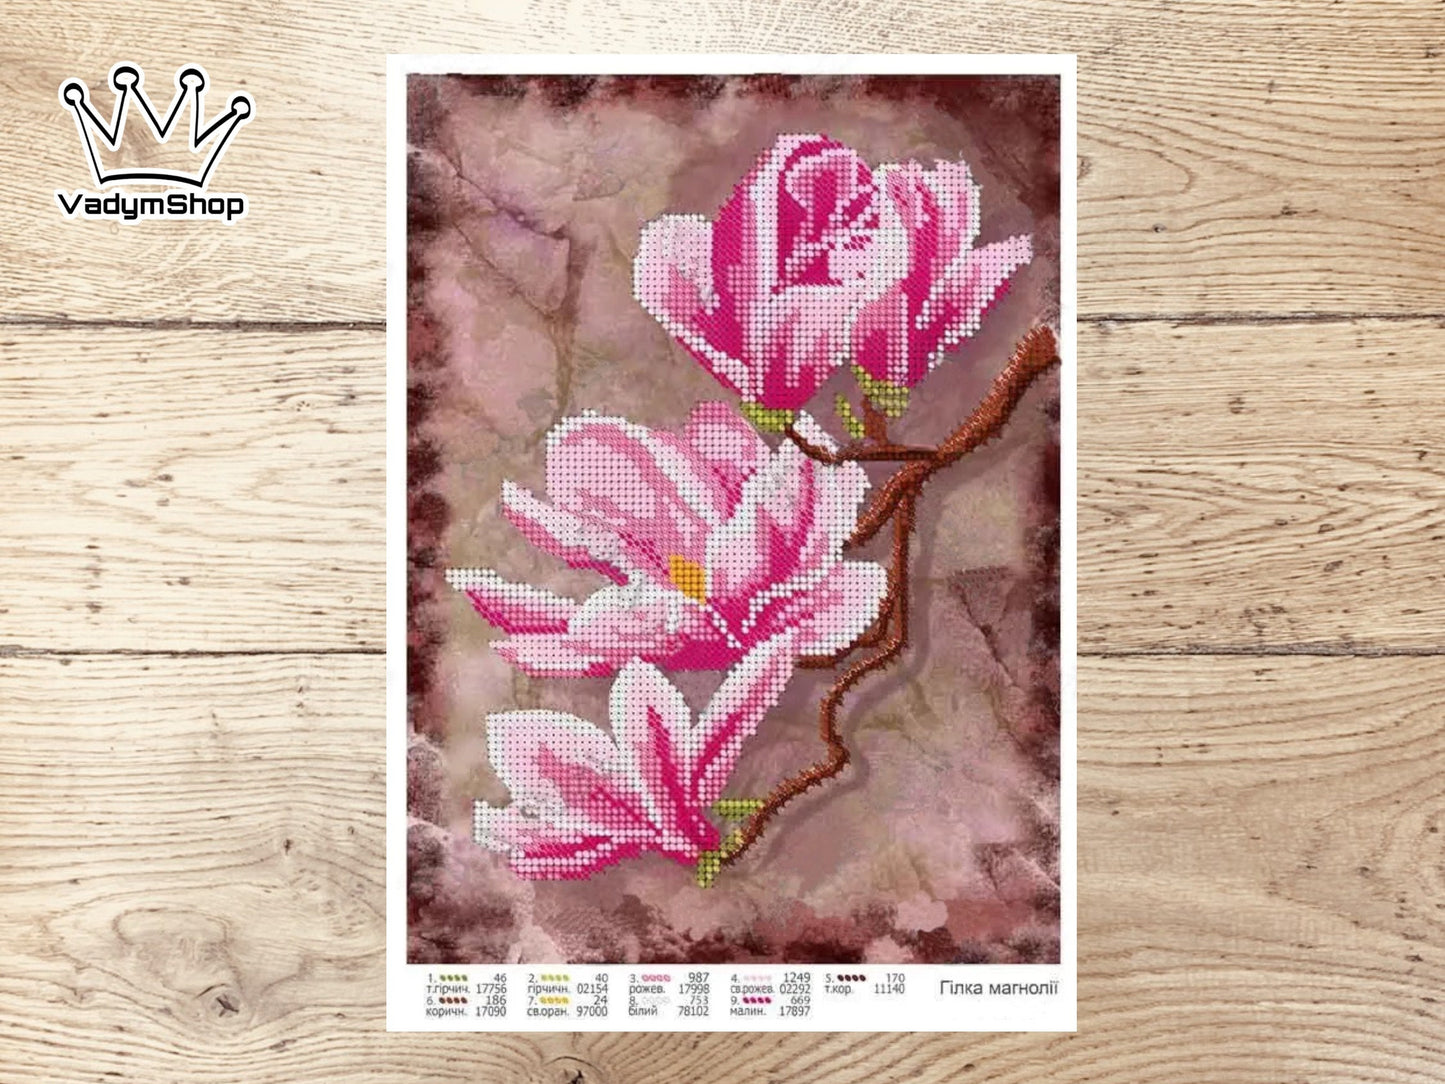 Bead Embroidery Kit featuring Exquisite Magnolia Pattern - Craft Your Own Stunning Accessories Size: 8.3-11.8in (21-30cm) - VadymShop